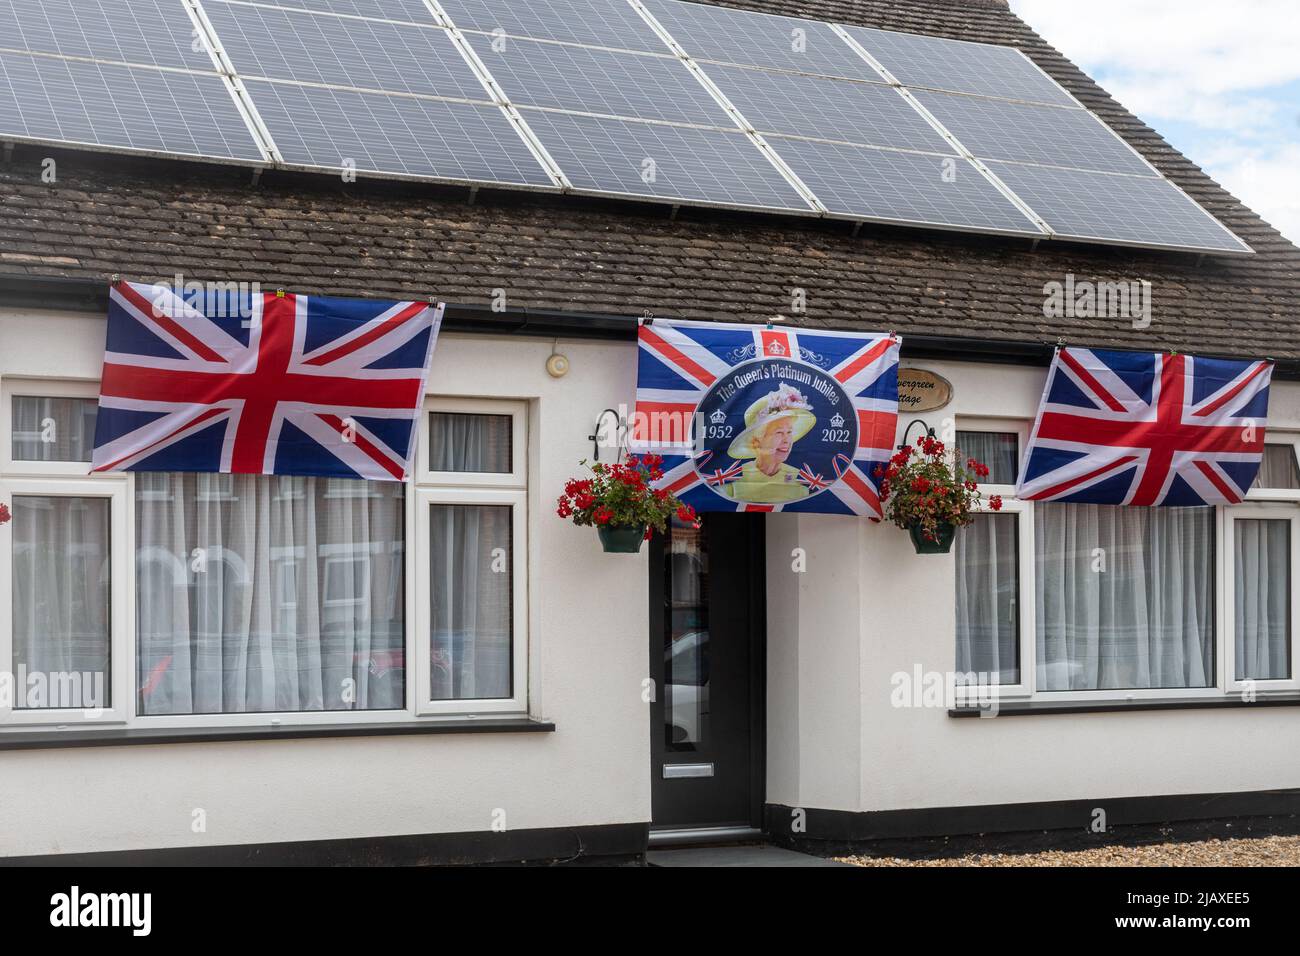 Platinum jubilee decorations flags on a bungalow house property to celebrate Queen Elizabeth II 70 years on the throne, June 2022 Stock Photo